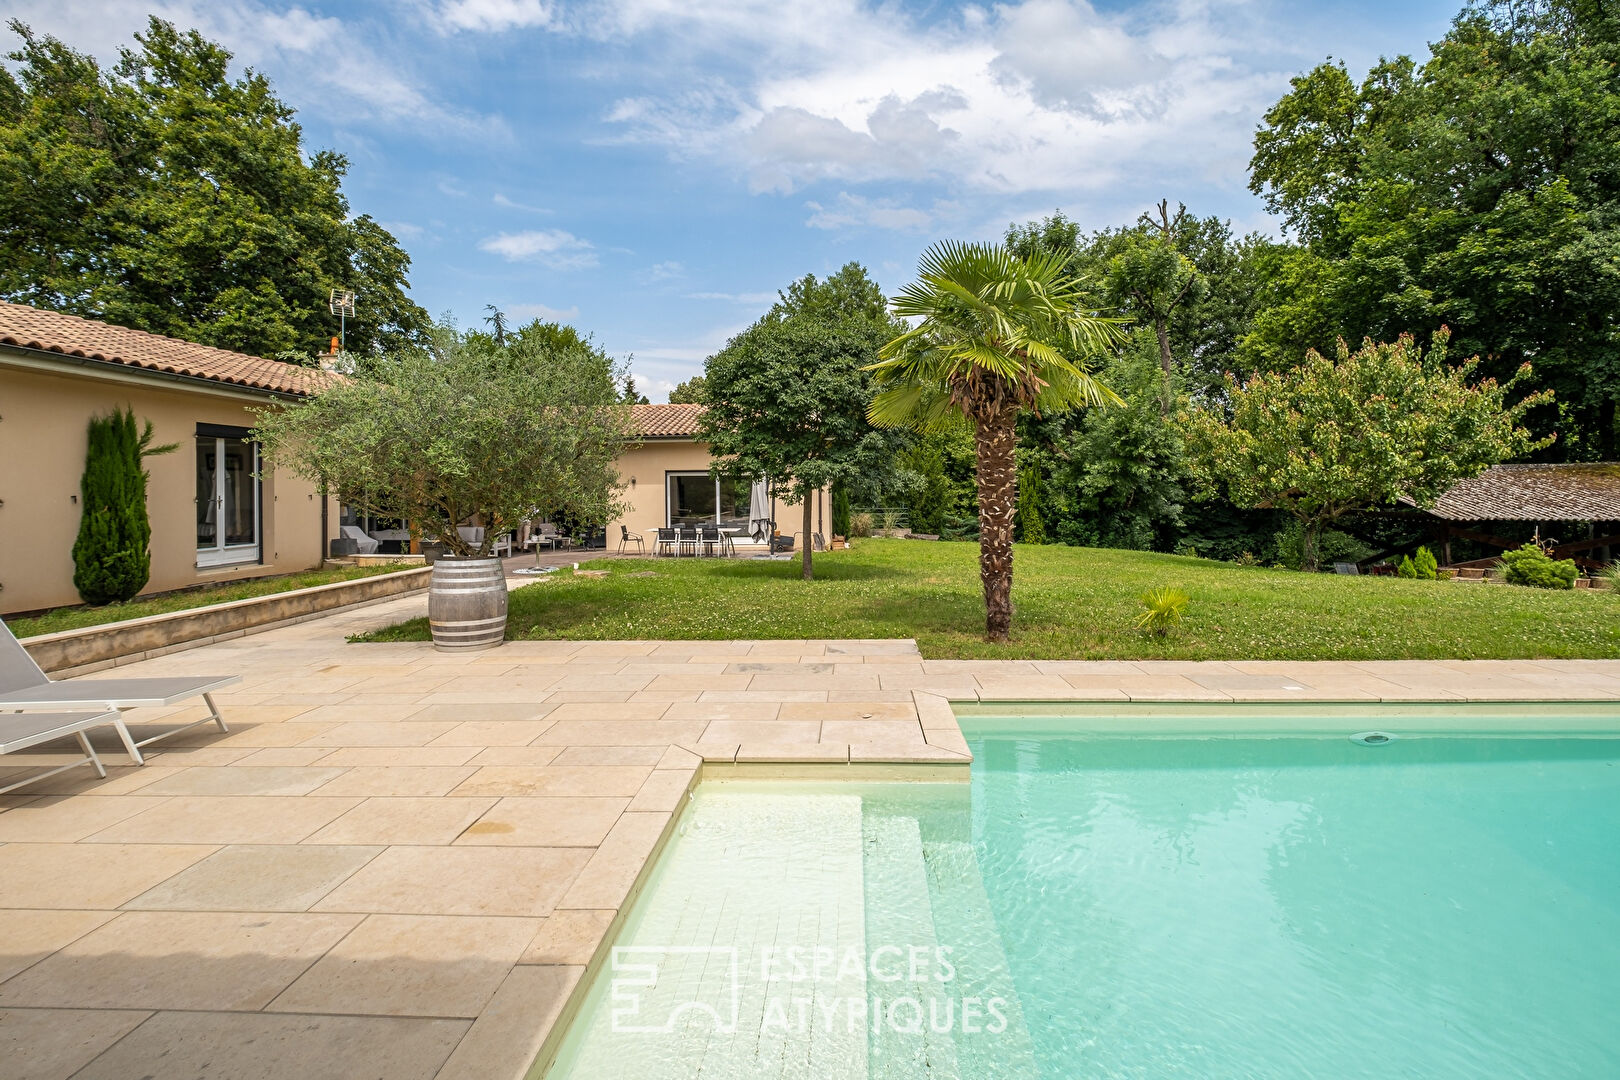 Single storey villa with swimming pool near the center of Ecully